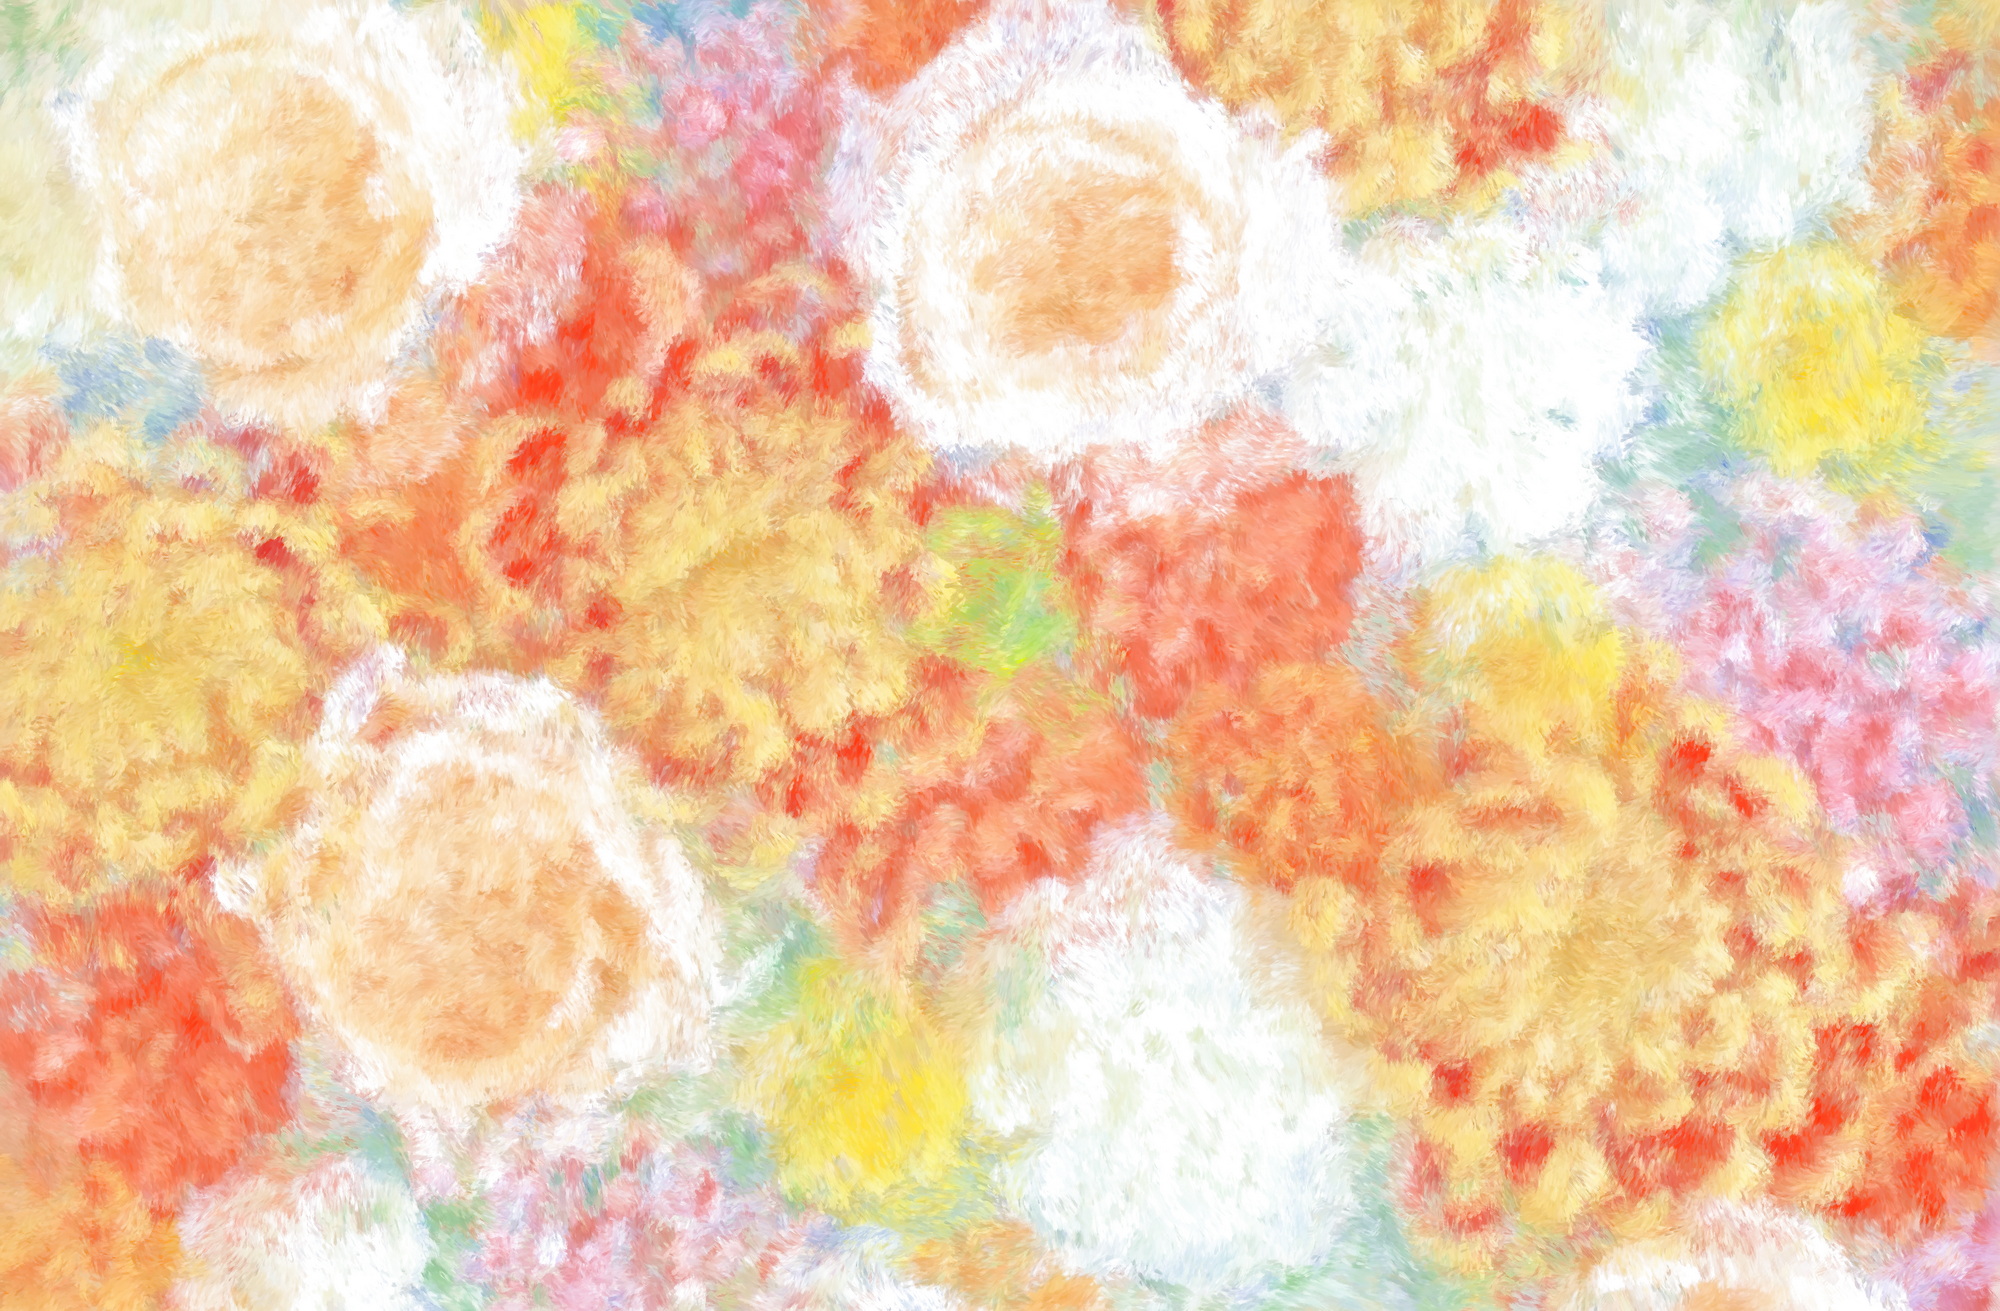 Chrysanthemums and roses painted with an impressionist touch